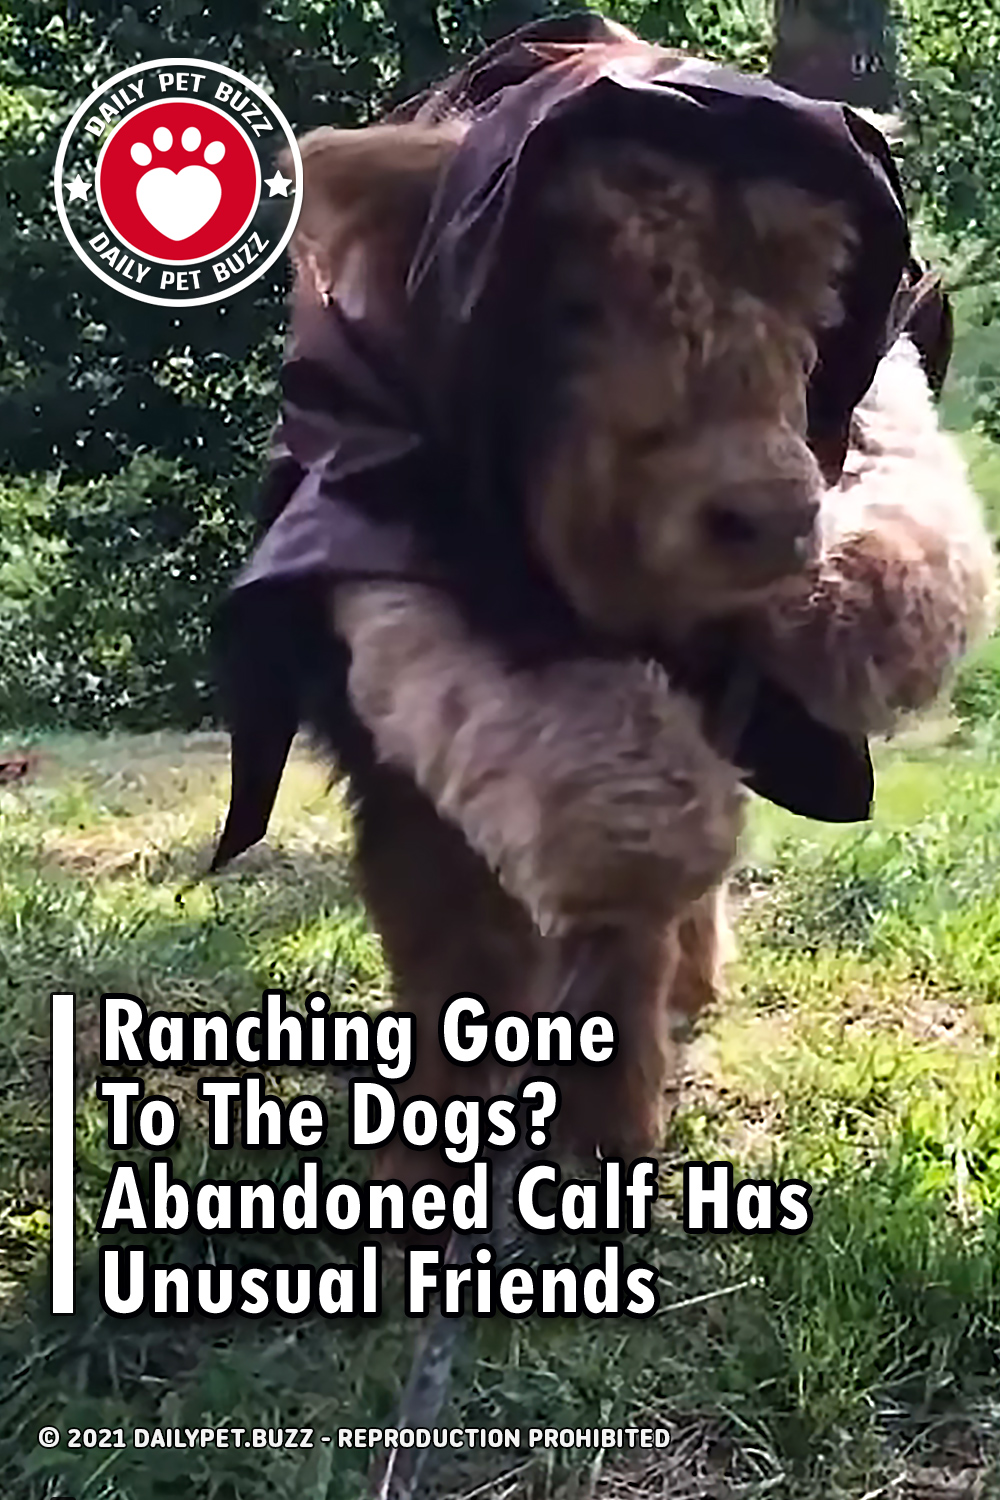 Ranching Gone To The Dogs? Abandoned Calf Has Unusual Friends